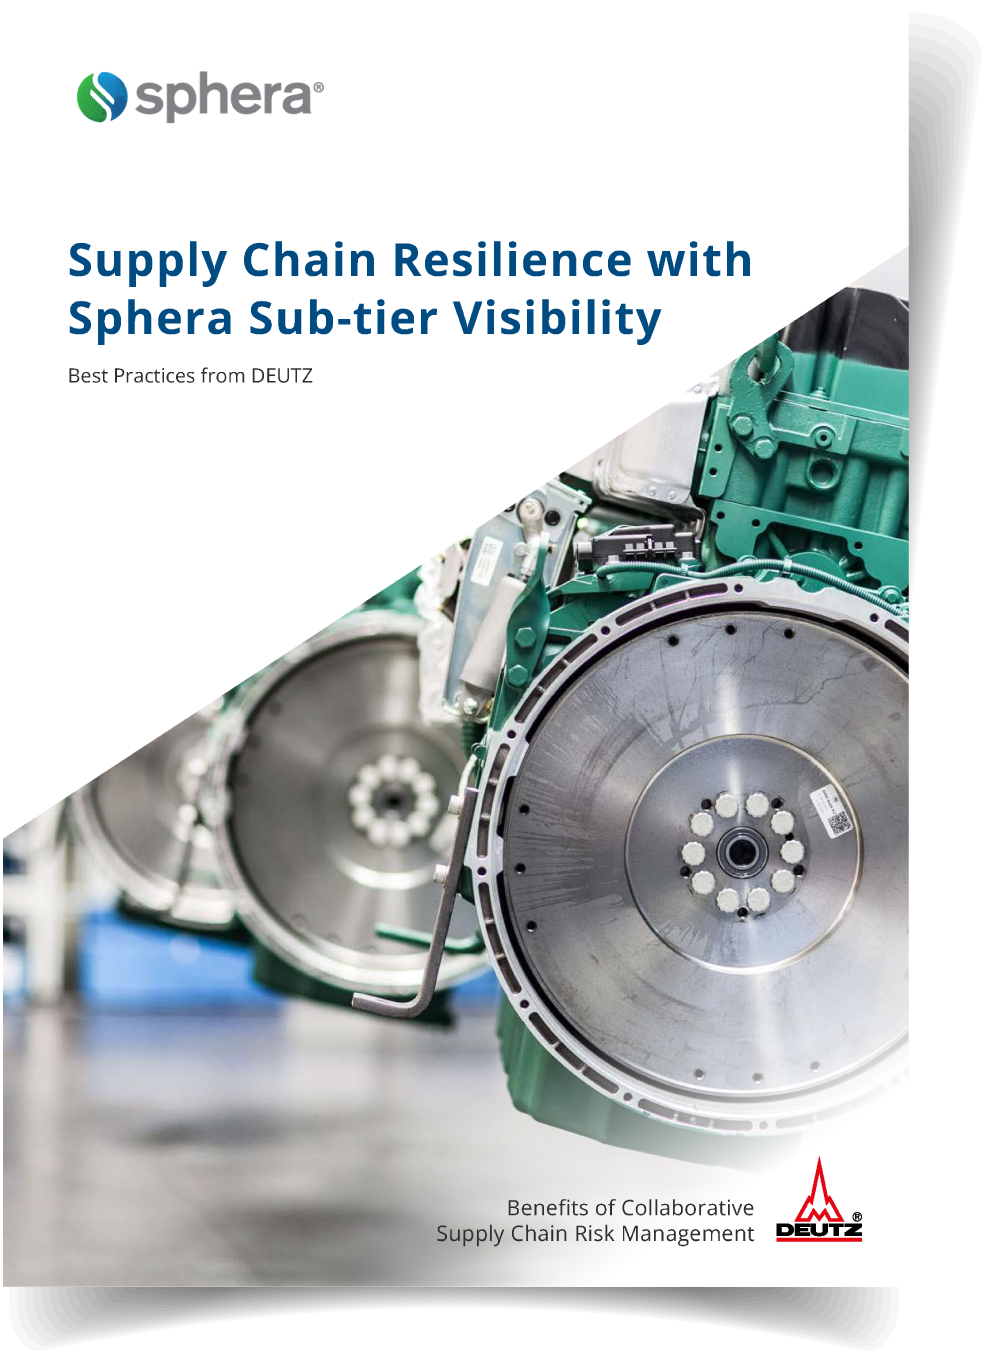 How DEUTZ Drives Supply Chain Resilience with Sphera Supply Chain Risk Management